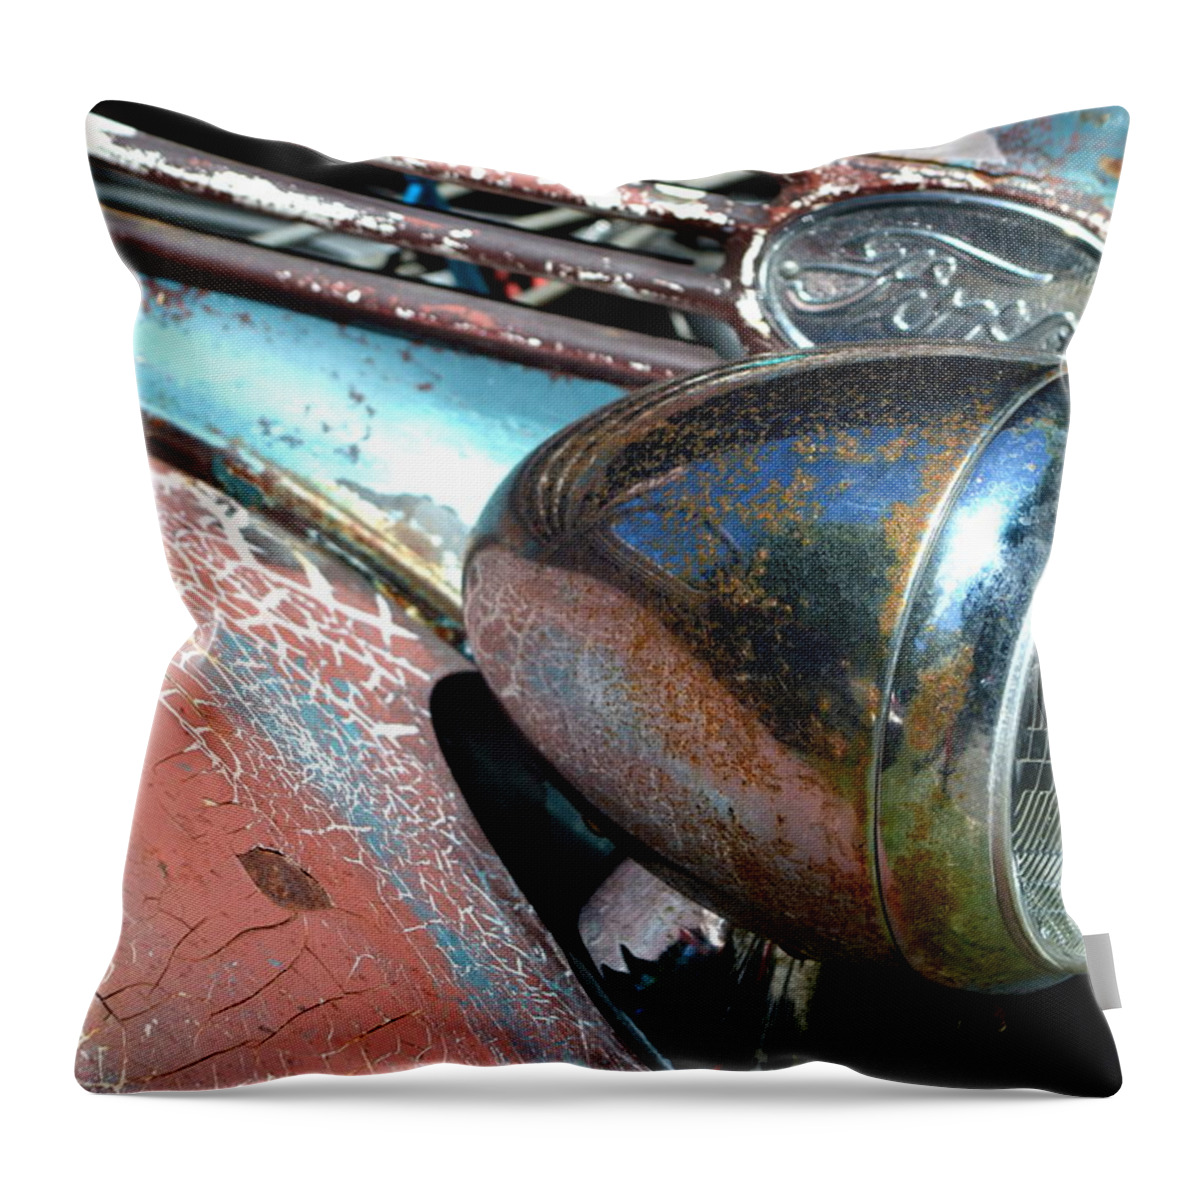 Ford Throw Pillow featuring the photograph Hr-32 by Dean Ferreira